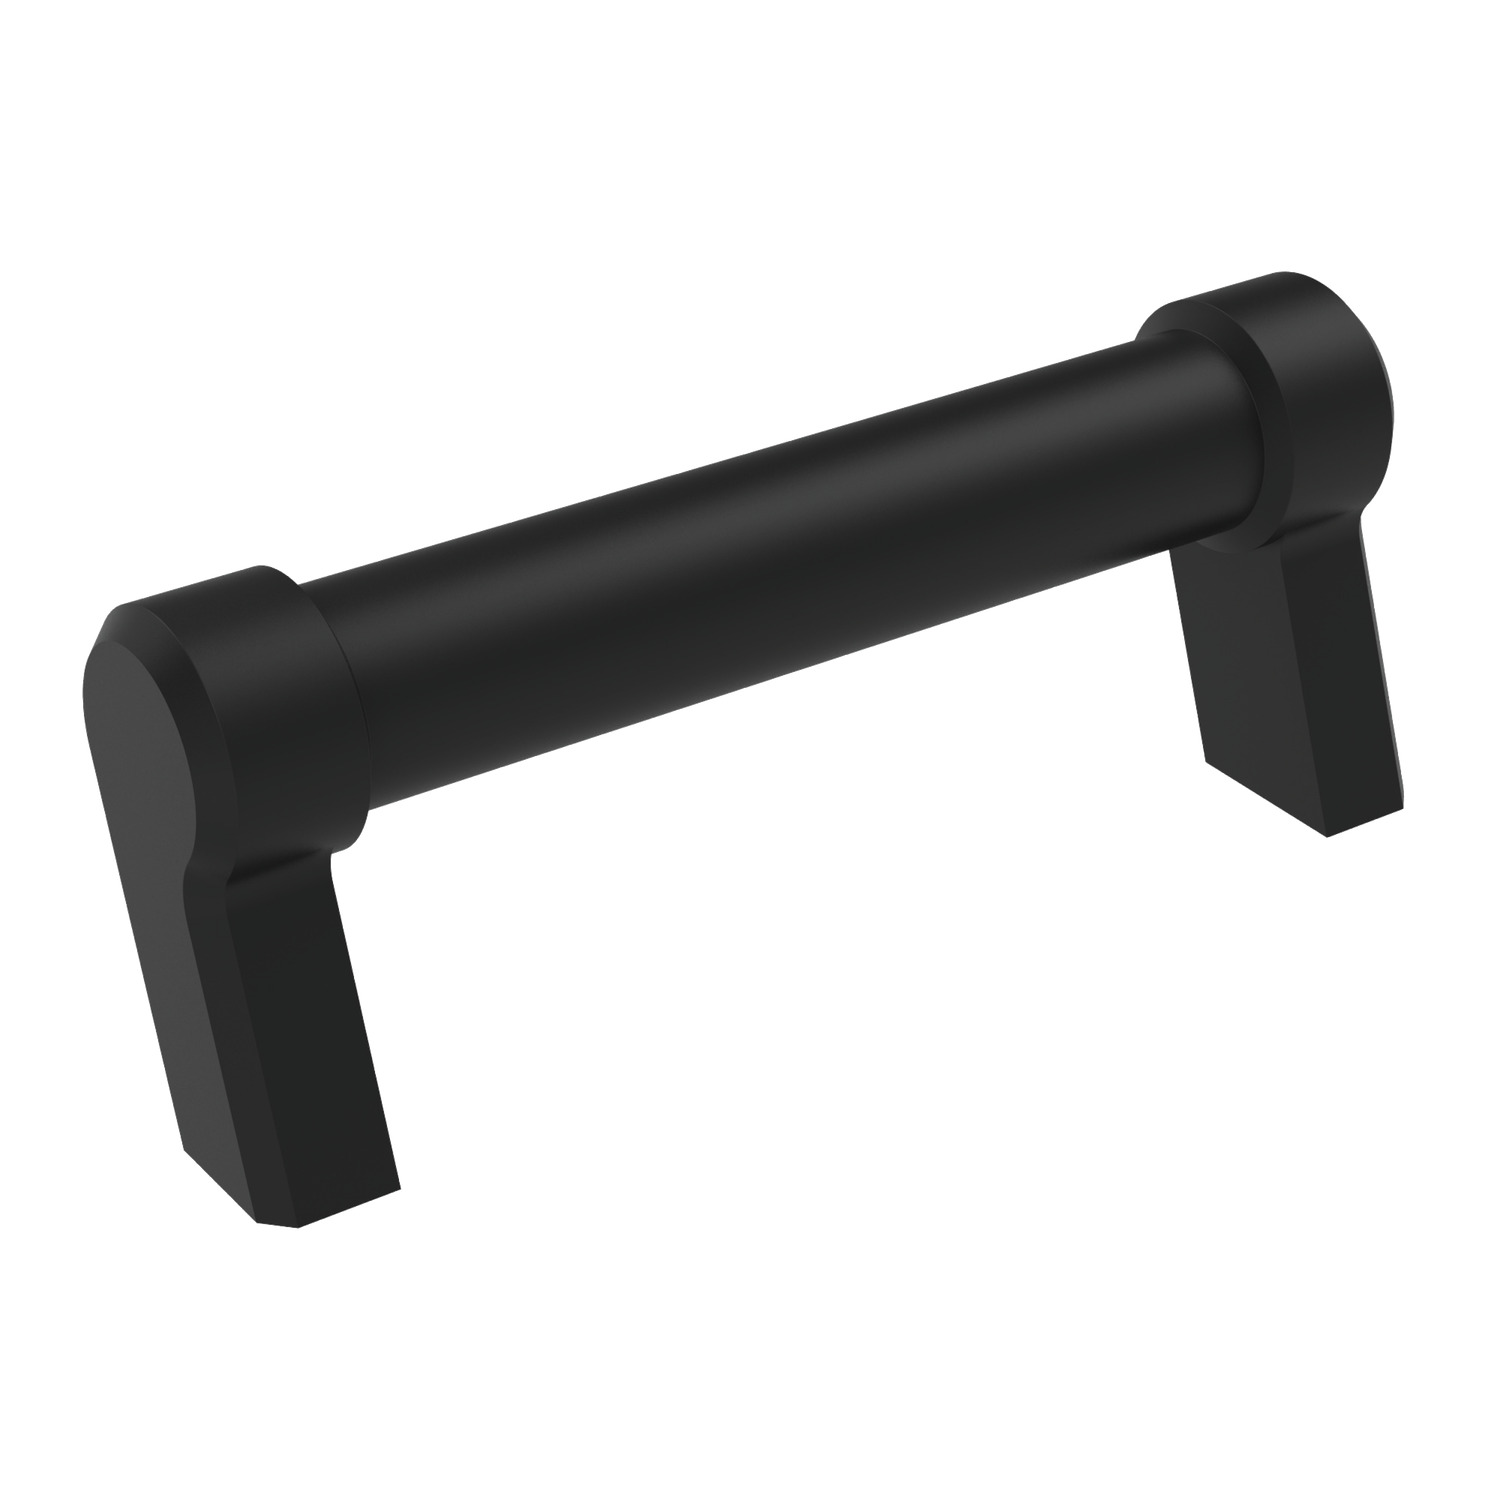 Pull Handle, Angled This plastic angled pull handle is reinforced with threaded brass bushings. Black or light grey semi matte with fine-grain structure.